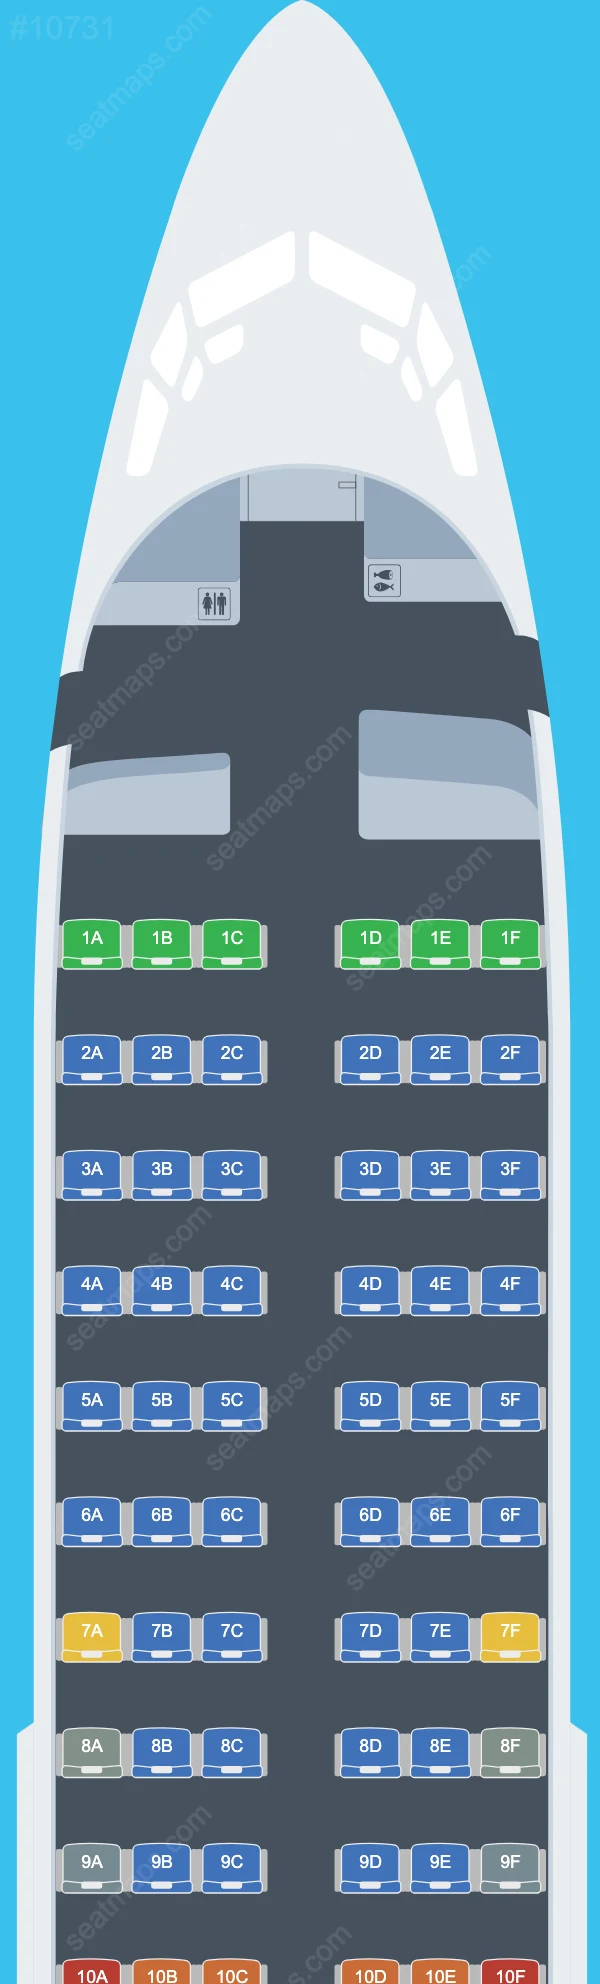 Canadian North Boeing 737 Seat Maps 737-700